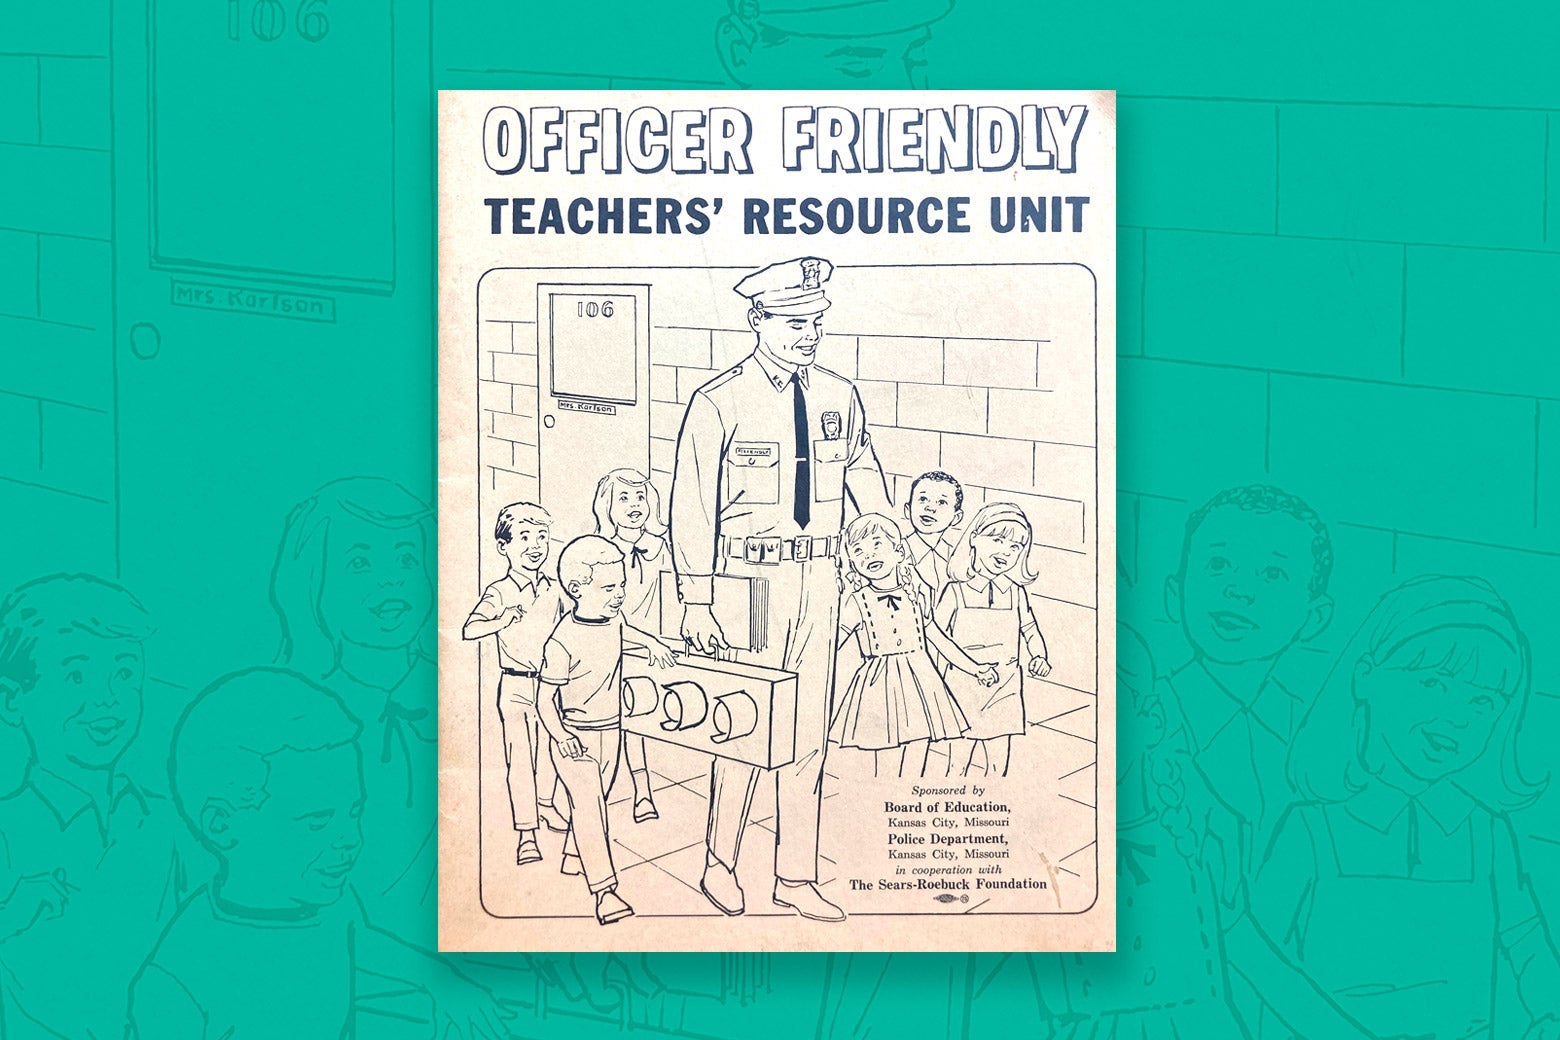 The cover of Officer Friendly Teacher's Resource Unit booklet from 1968 seen over an enlarged, slightly faded version of the same cover.